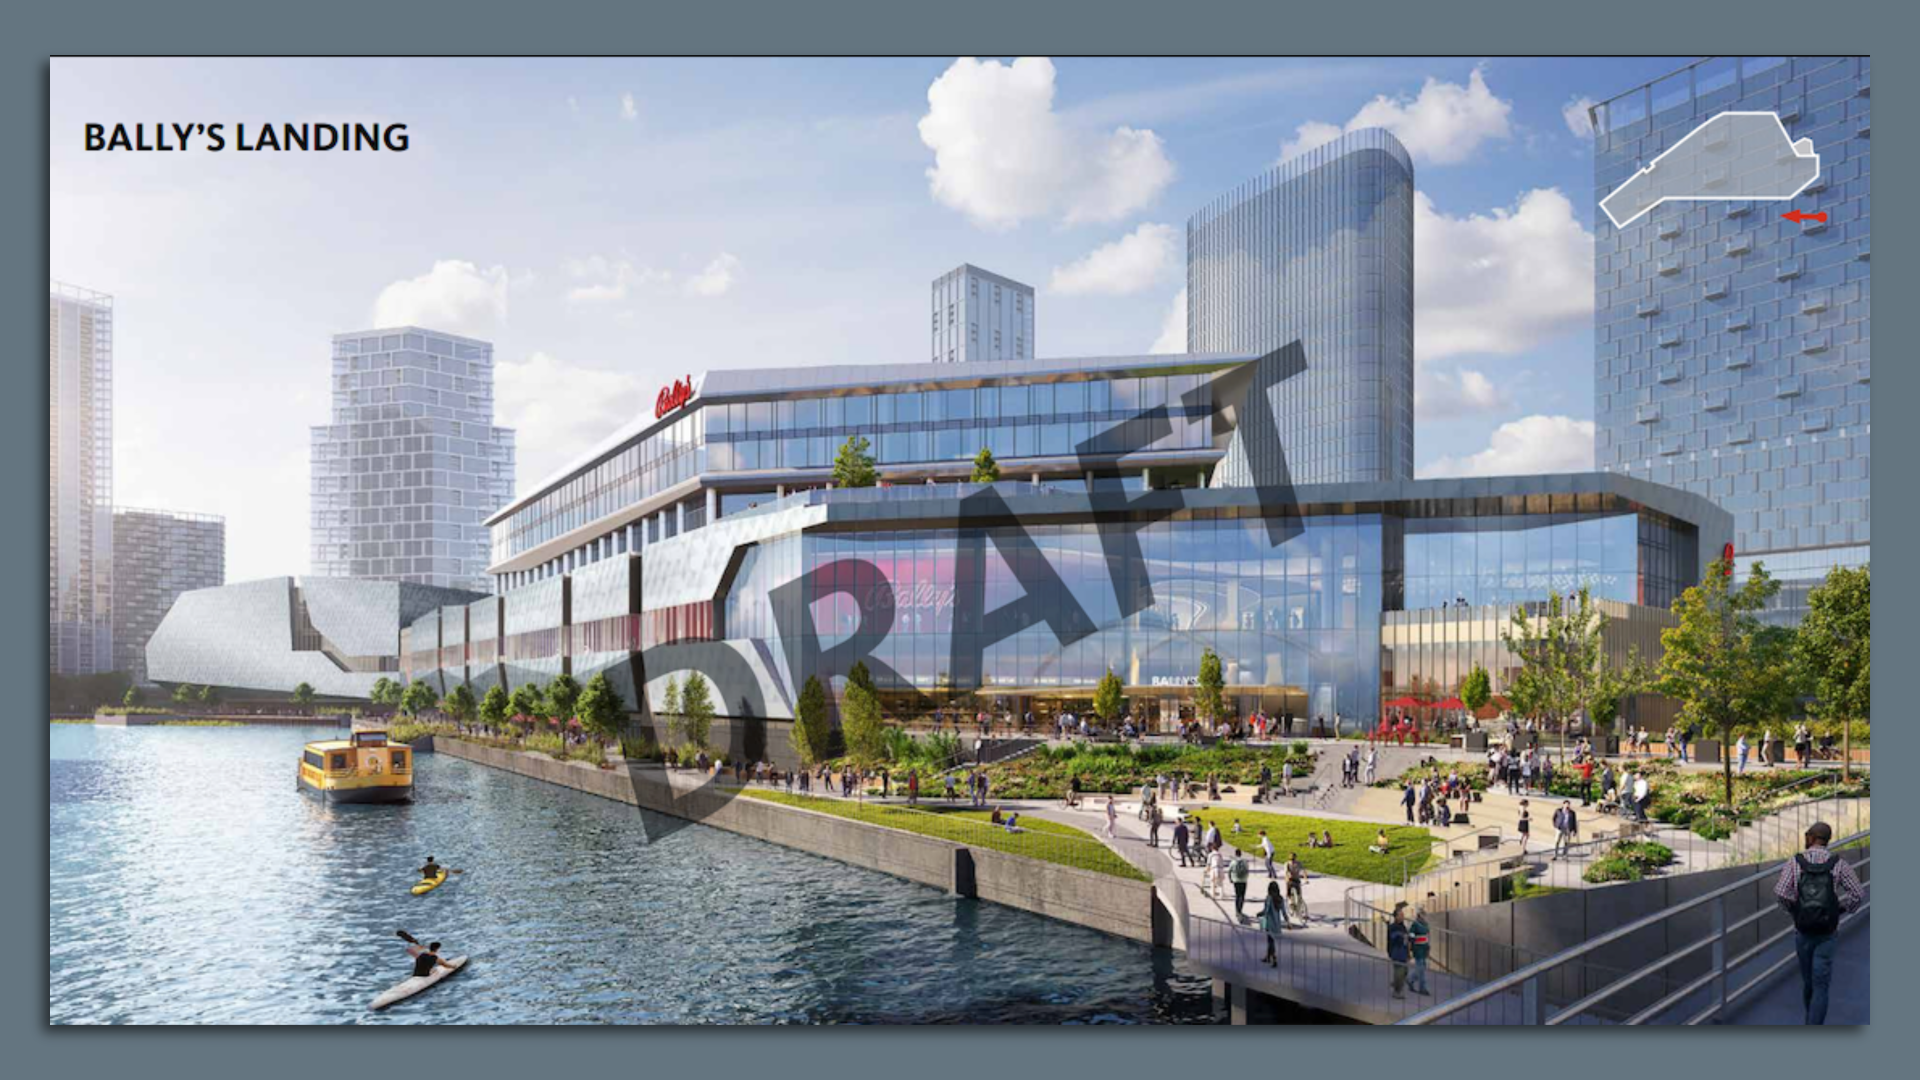 A drafted rendering of a giant casino complex on the Chicago River.